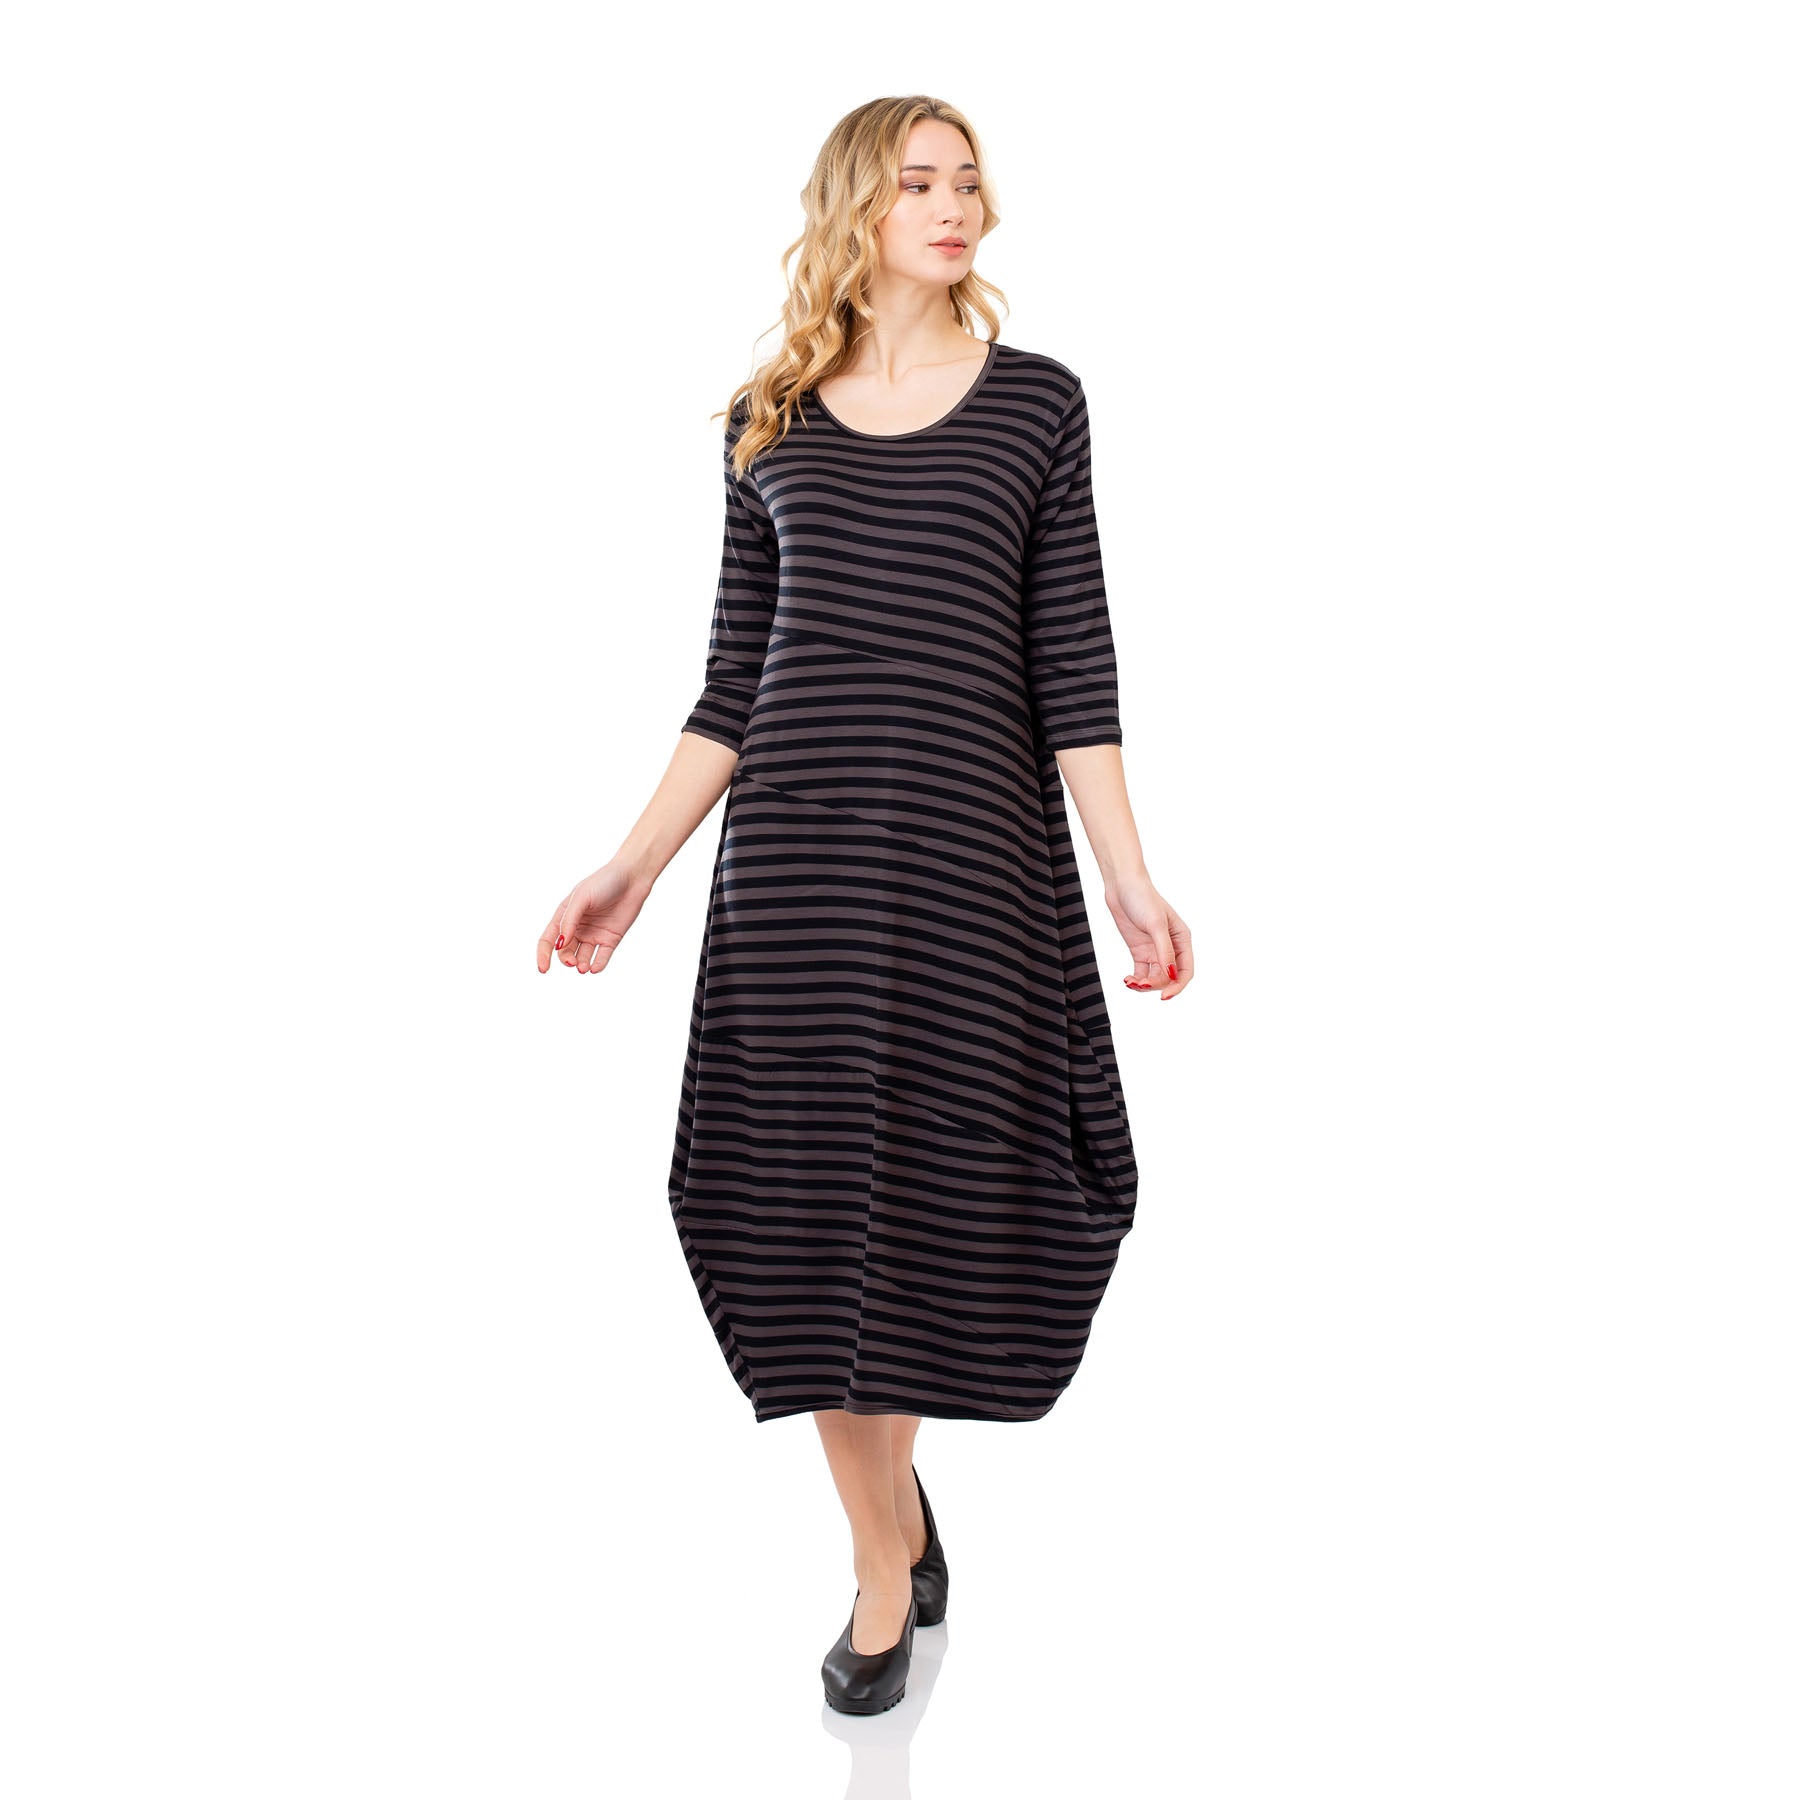 Juliette Dress - Black/Grey Striped - CHIC AND SIMPLE